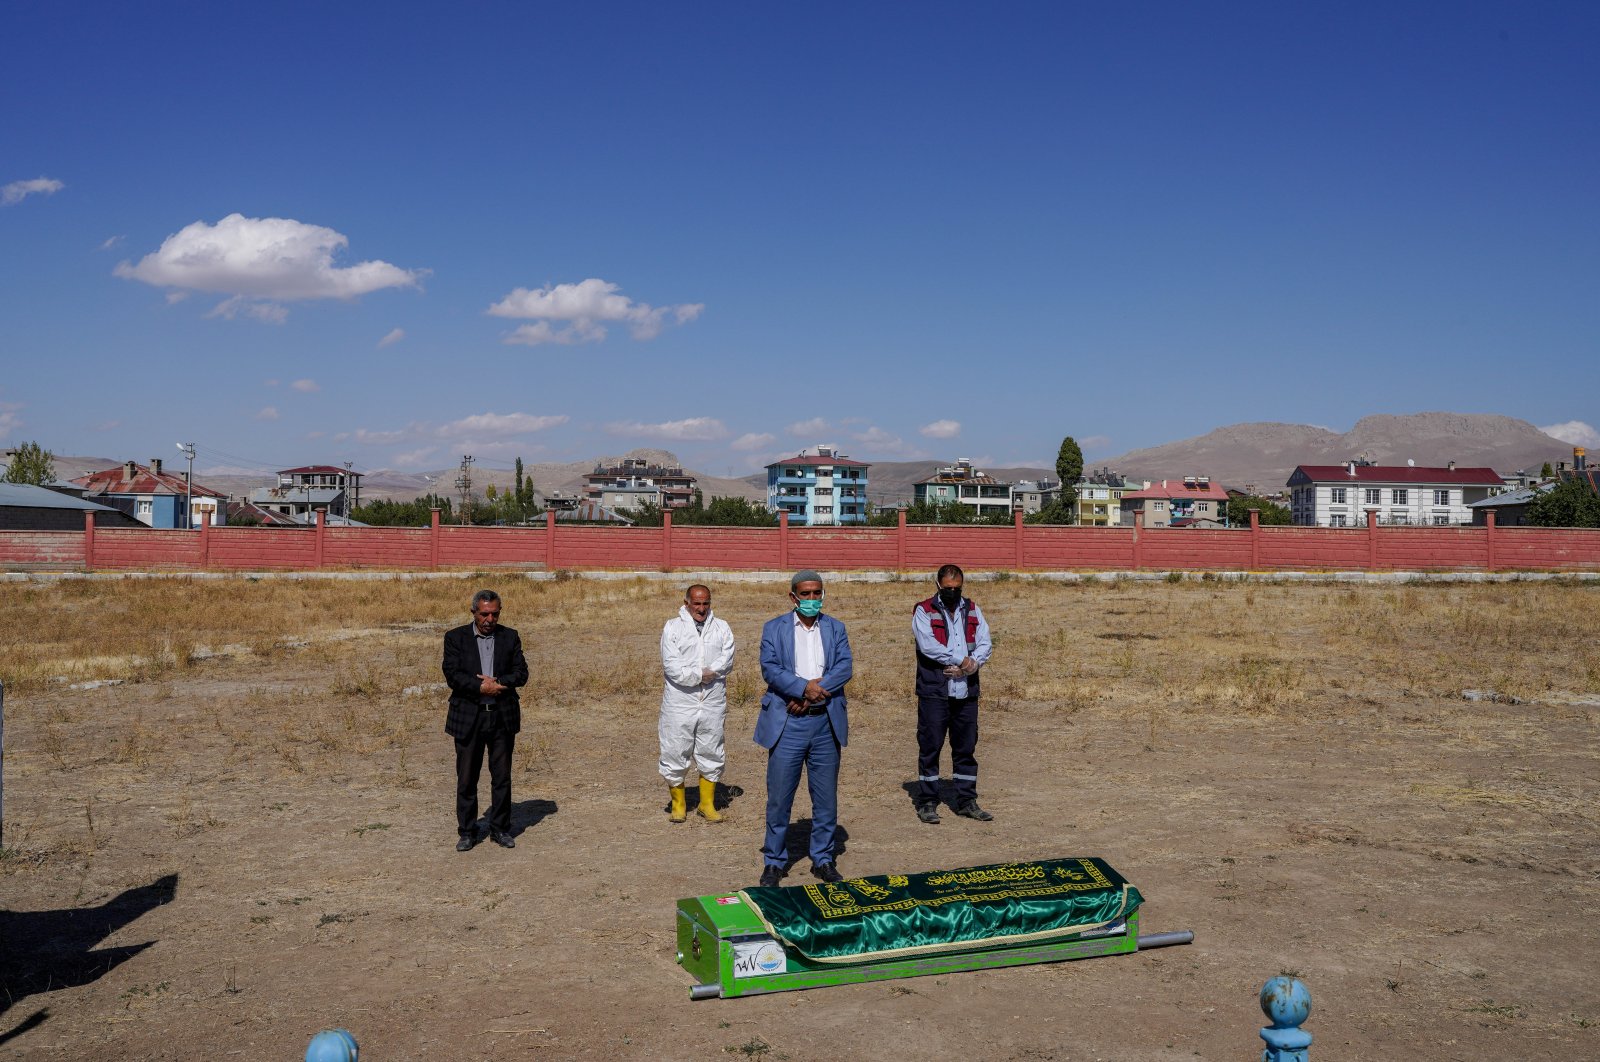 An imam and cemetery workers perform funeral prayers for an unidentified migrant, in Van, eastern Turkey, Oct. 7, 2021. (PHOTO BY UĞUR YILDIRIM)